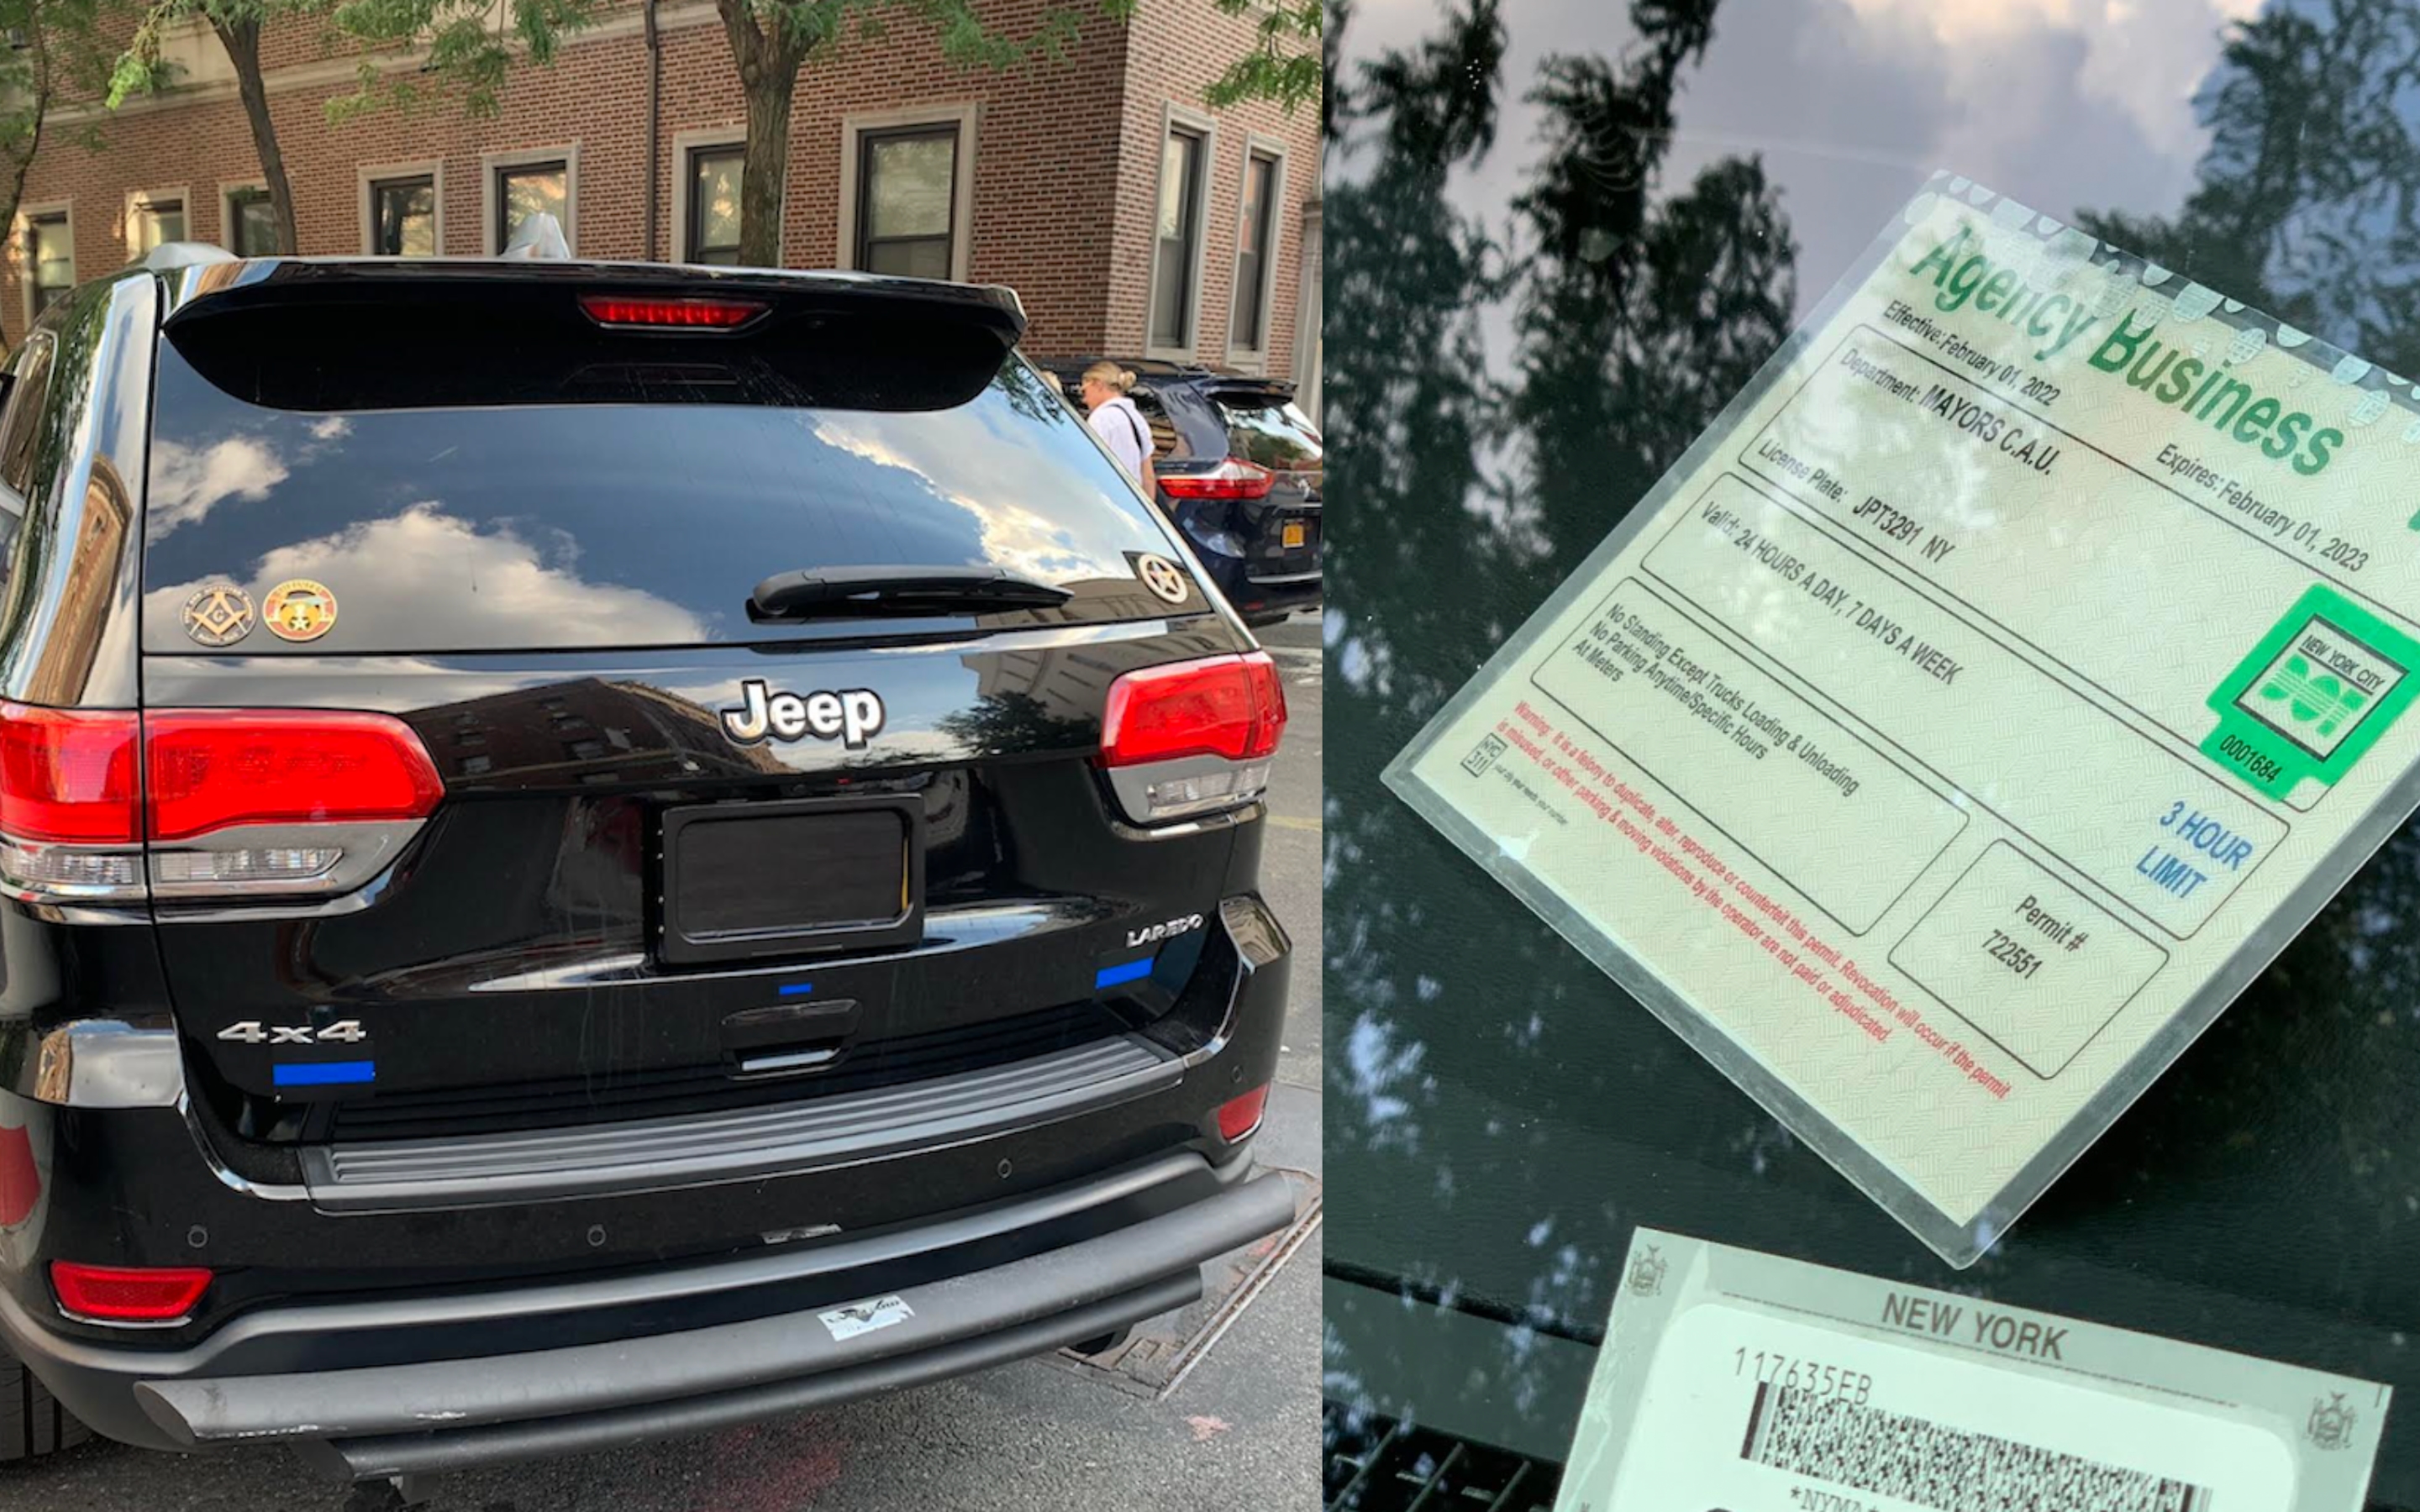 A diptych showing the black Jeep with the illegal license plate cover, and the placard showing the Mayor's Community Affairs Unit placard.